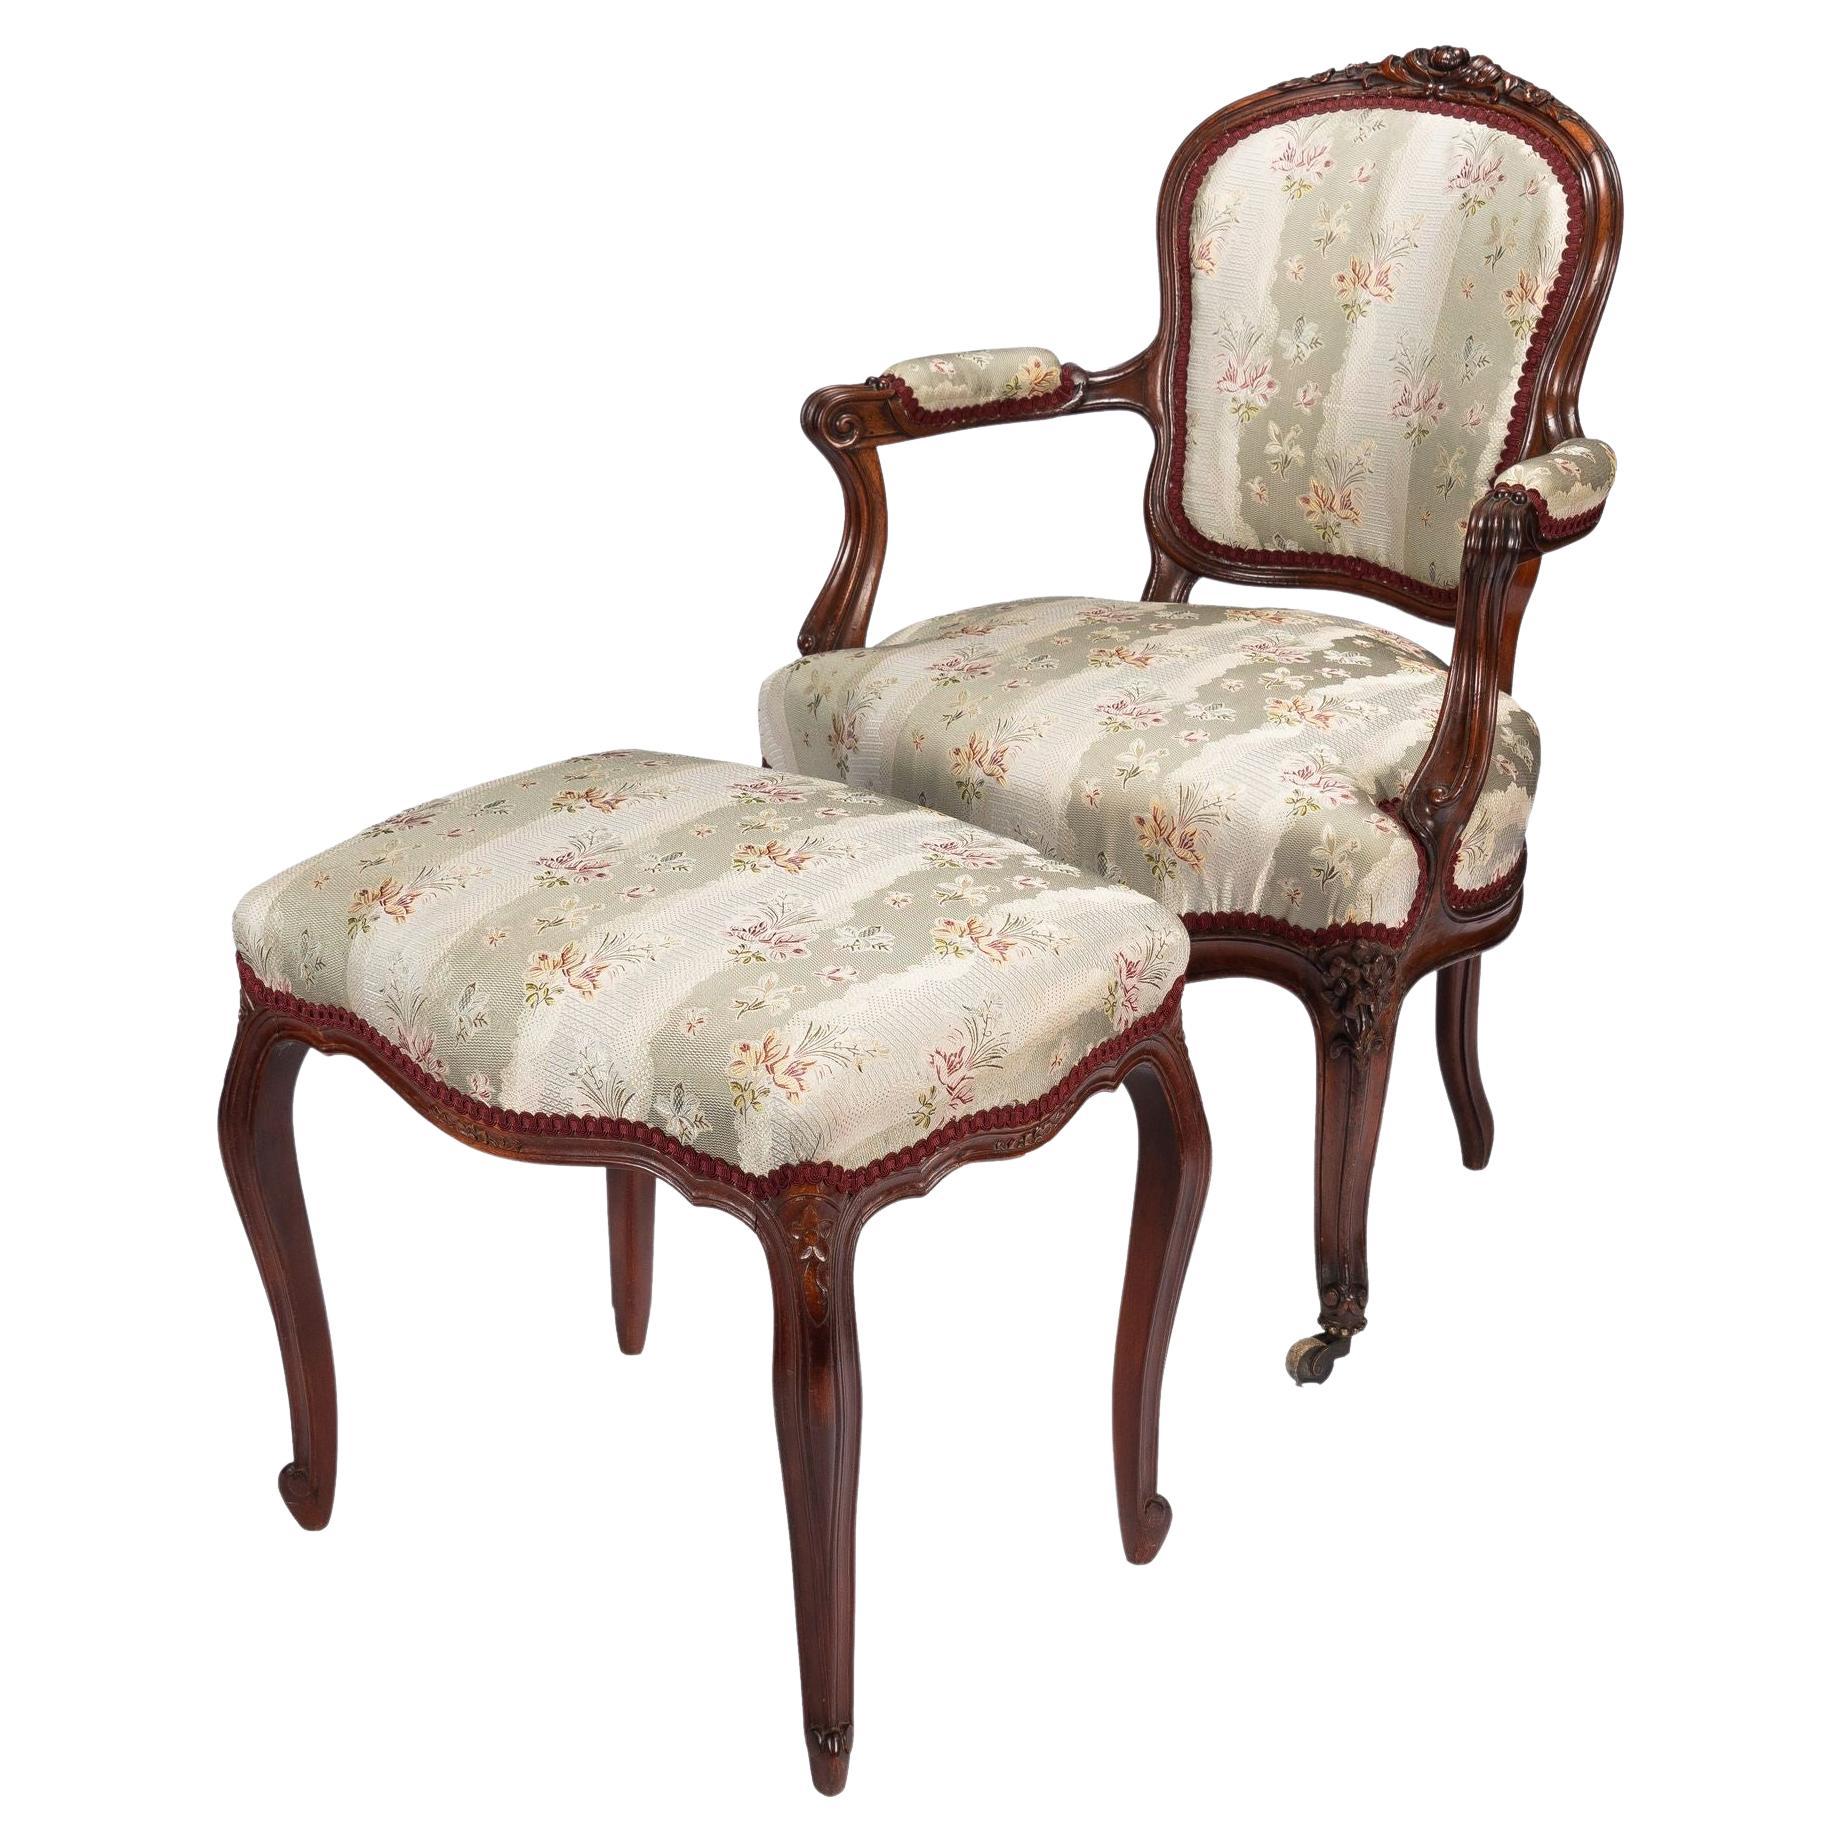 French Louis Philippe period walnut arm chair with paired footstool, c. 1850's